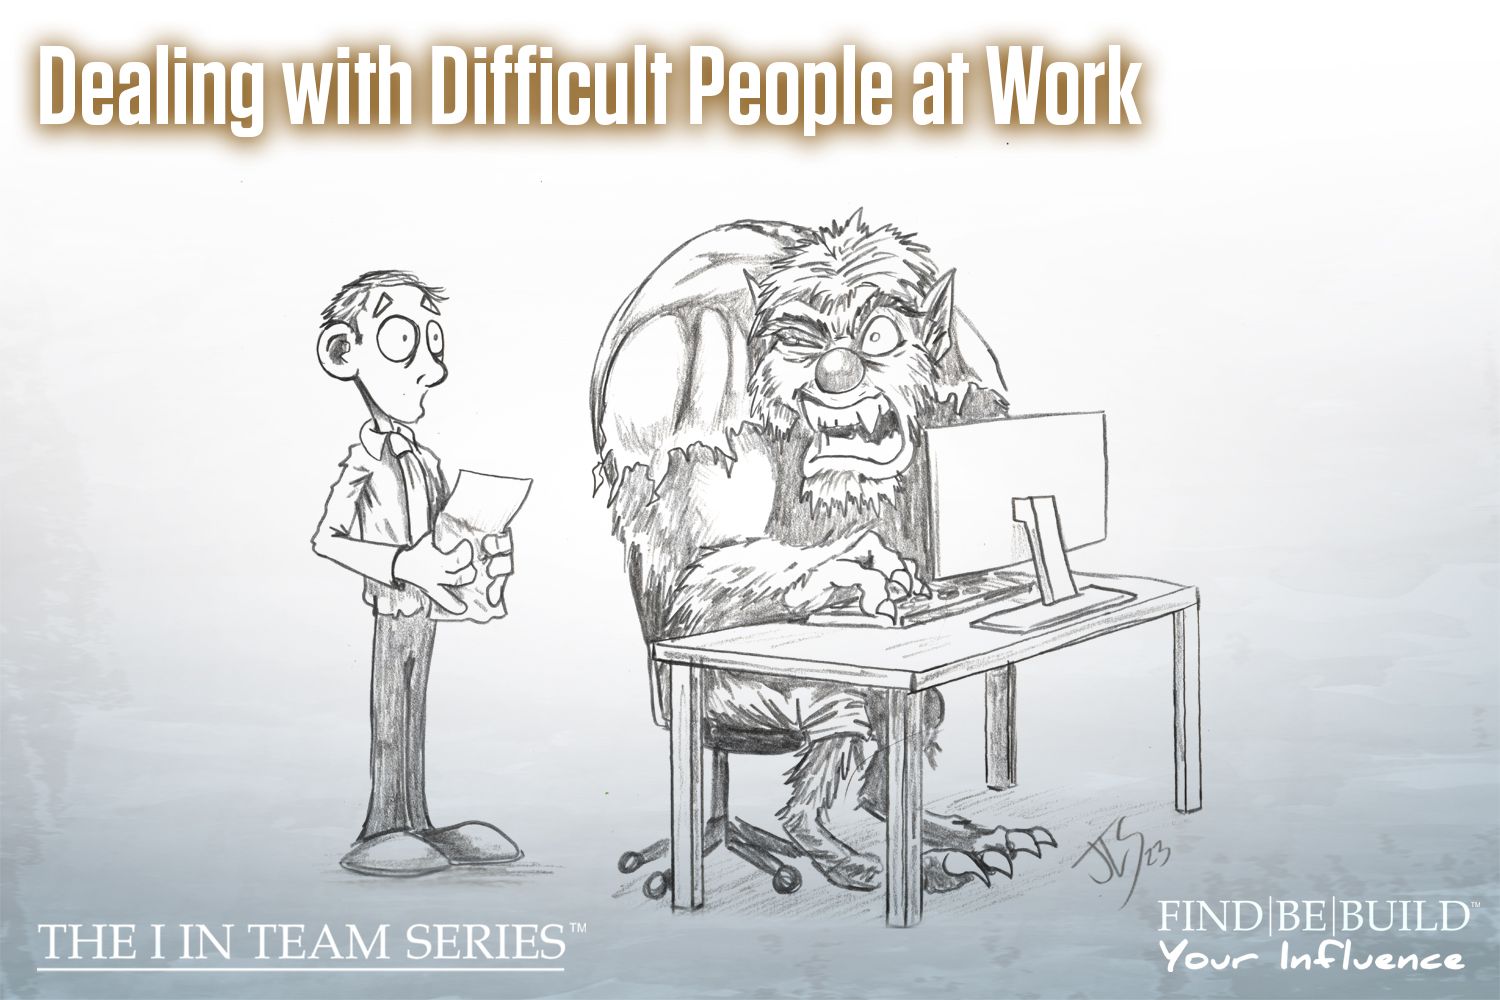 Dealing with Difficult People at Work